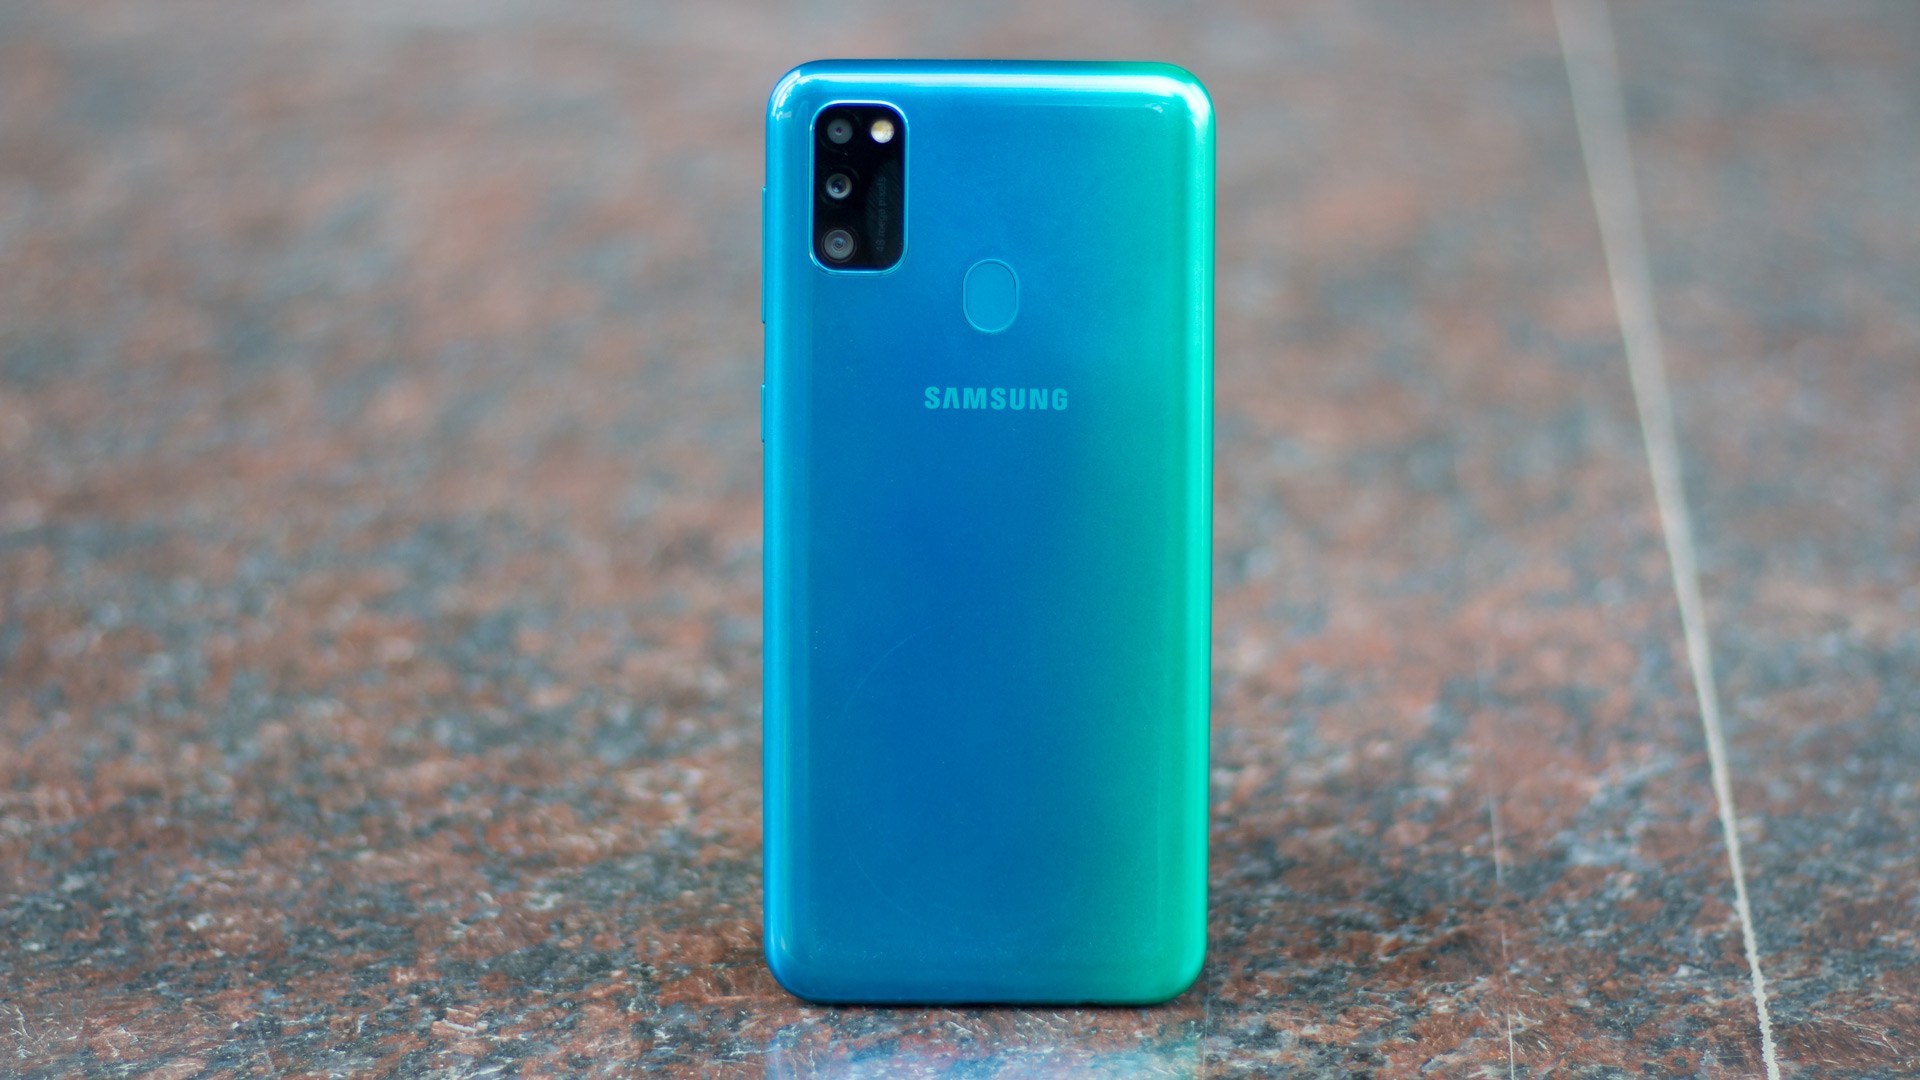 Samsung-Galaxy-M30s-review-pros-and-cons-india-6.jpg